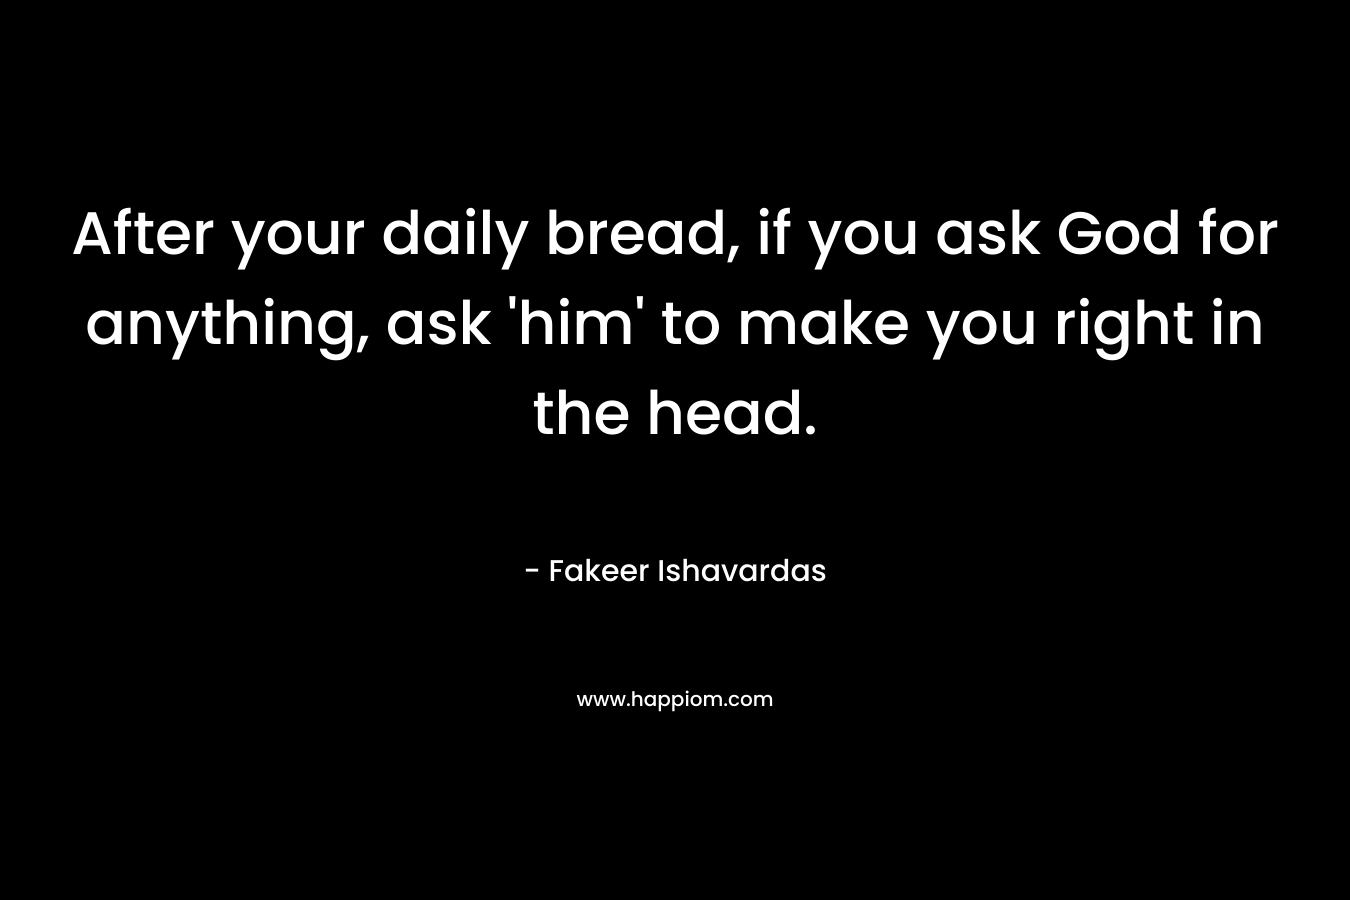 After your daily bread, if you ask God for anything, ask ‘him’ to make you right in the head. – Fakeer Ishavardas